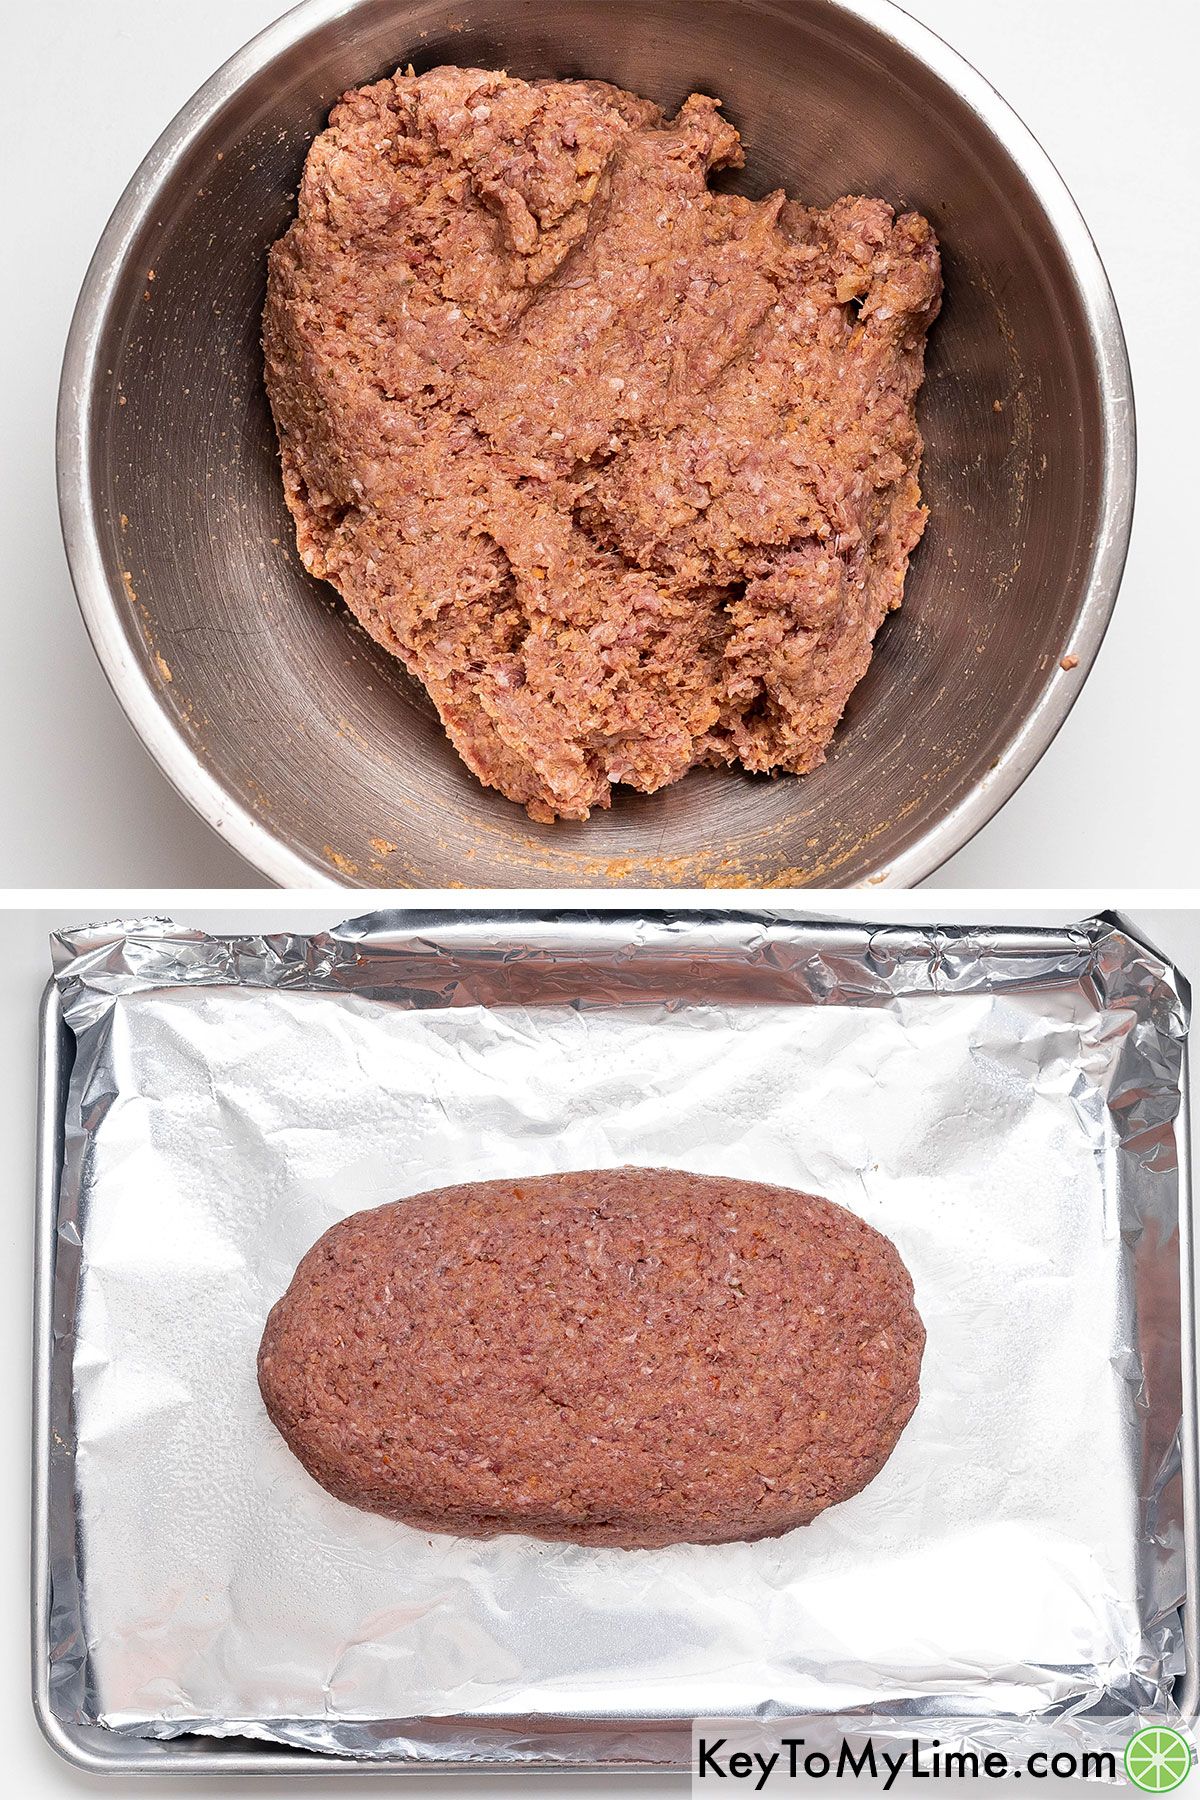 Thoroughly mixing the meatloaf mixture, then transferring it to a prepared baking sheet to mold.